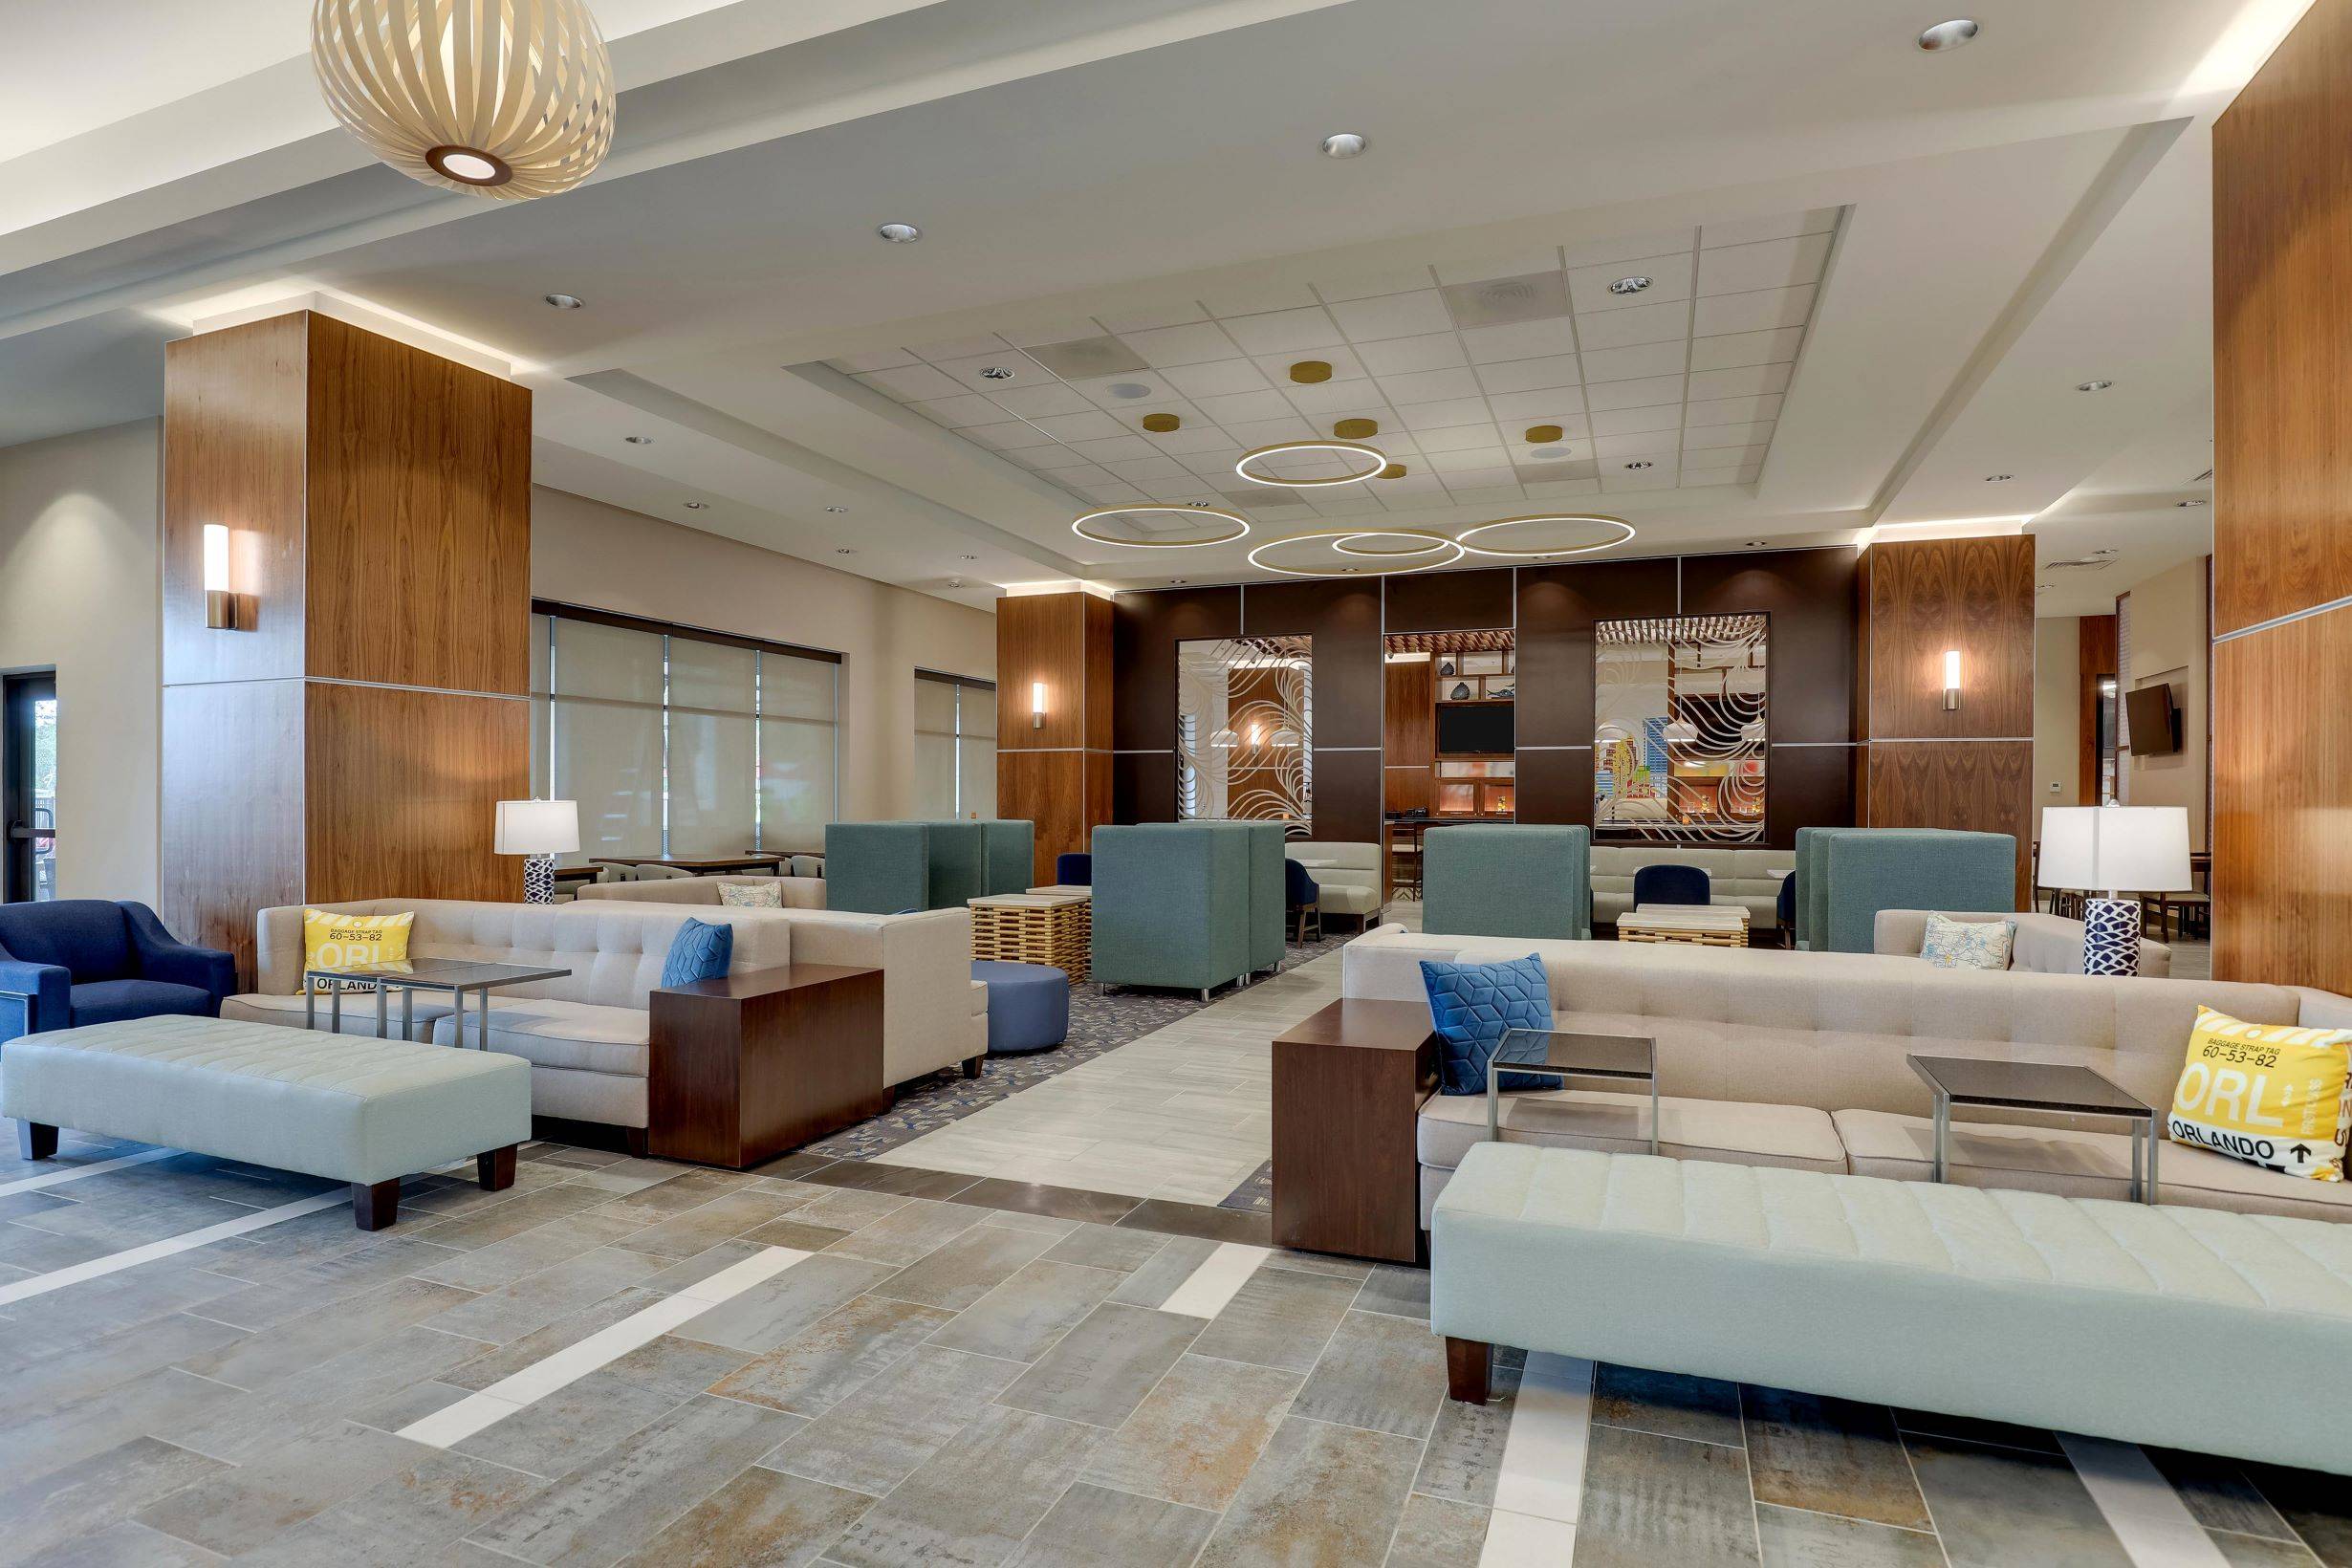 Drury Plaza Hotel Orlando within the Disney Springs area officially opens  